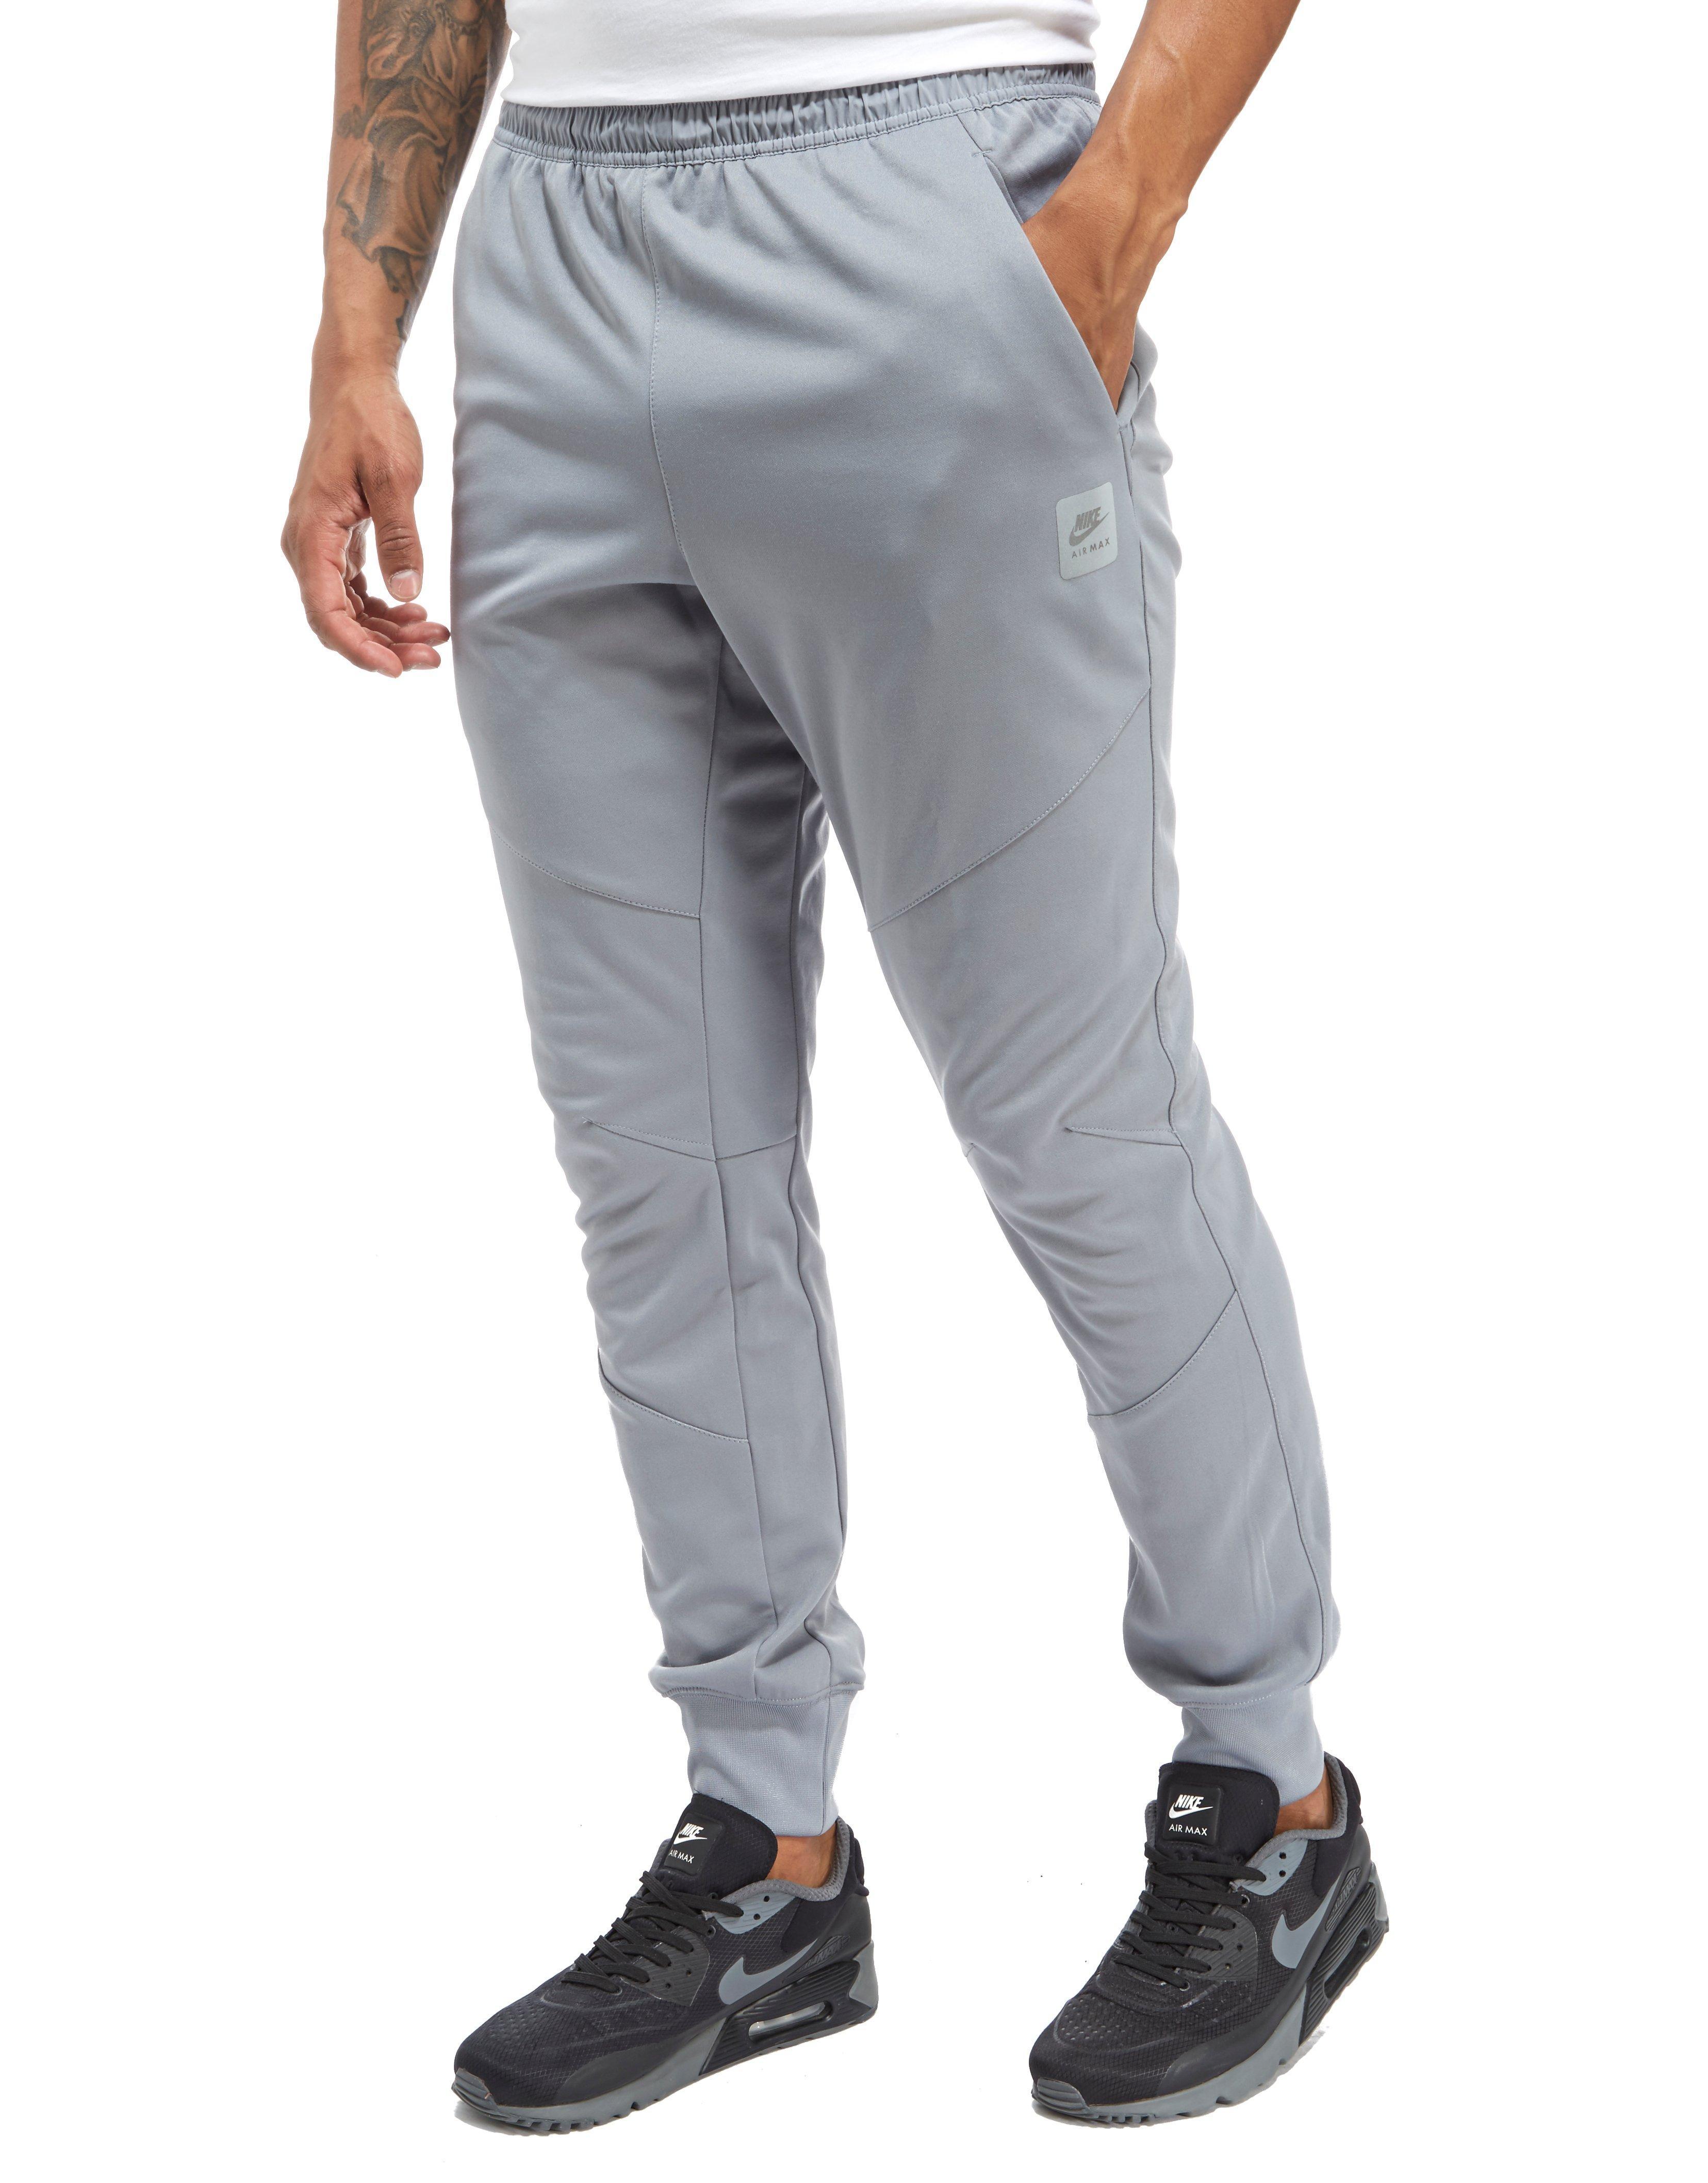 Nike Synthetic Air Max Poly Track Pants in Gray for Men - Lyst